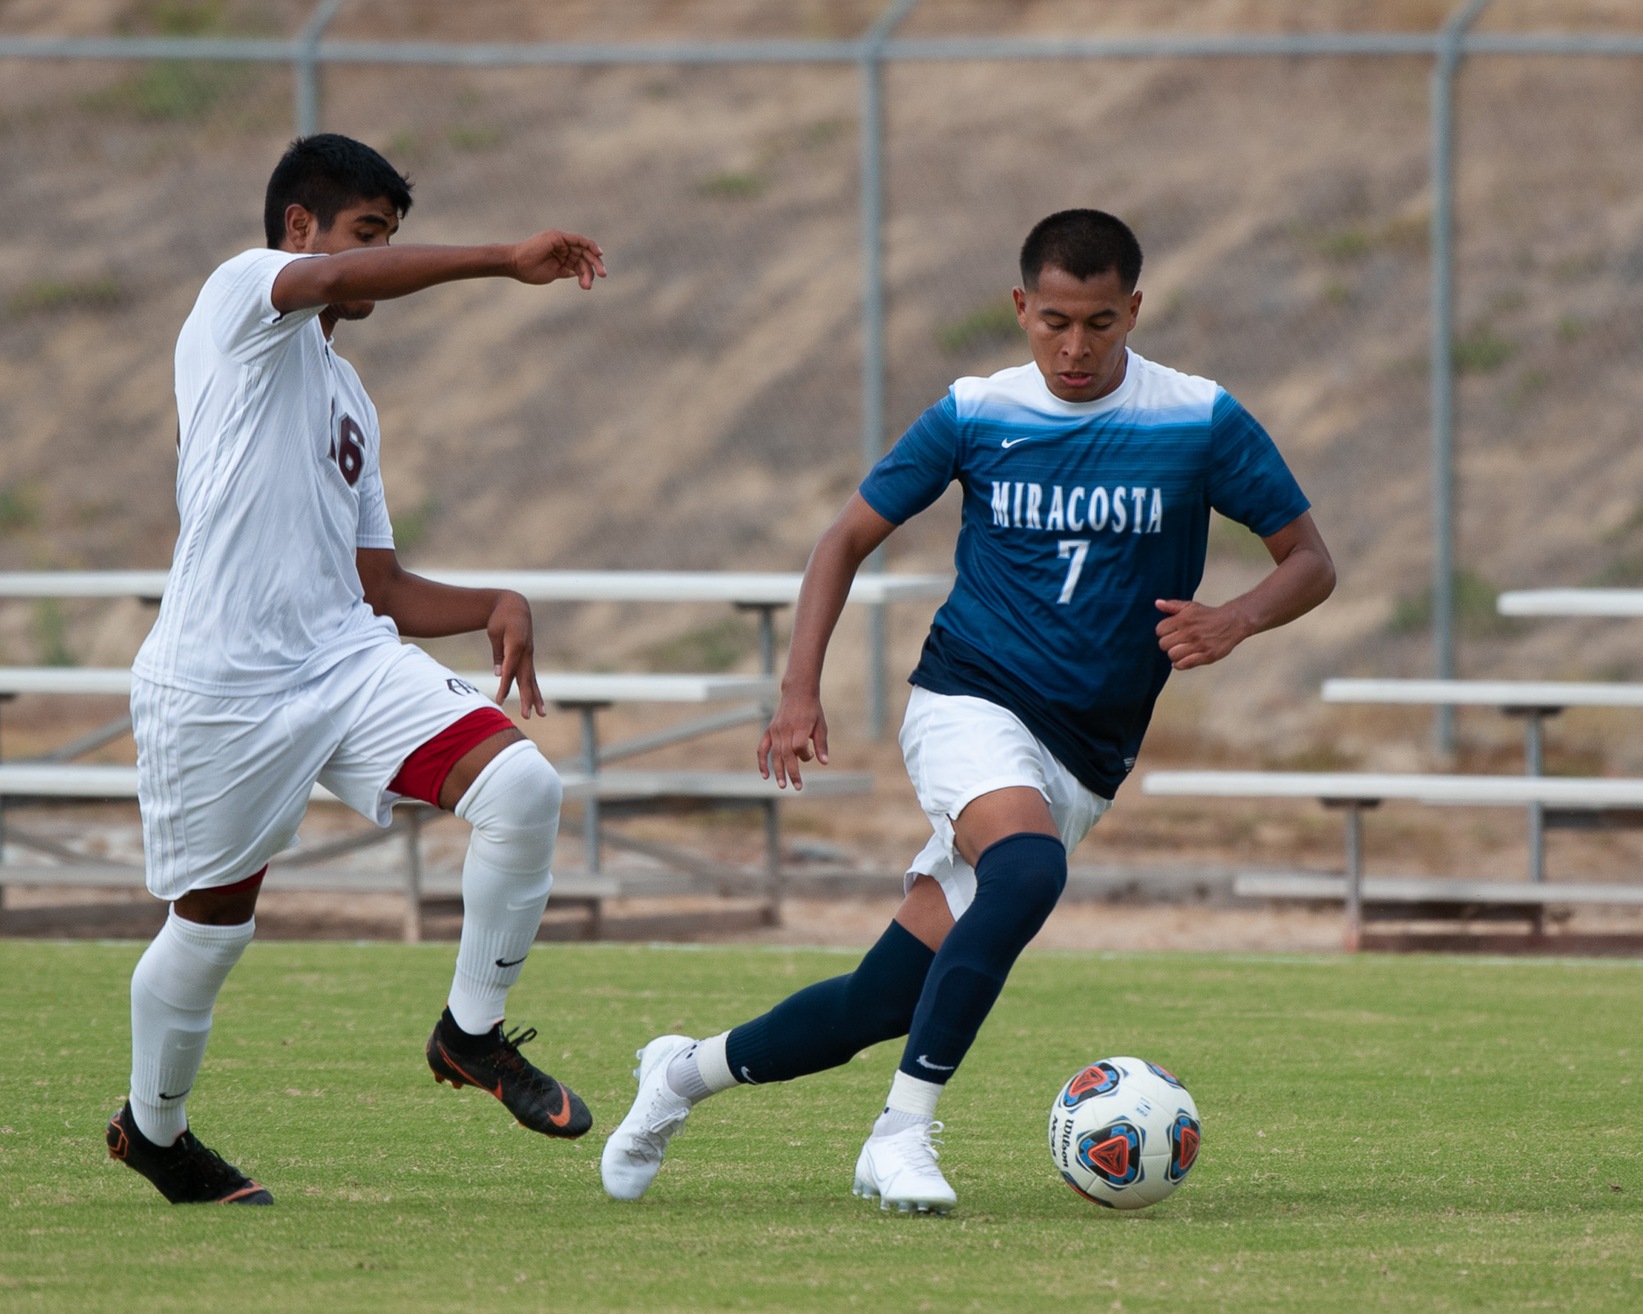 Heron Martinez dribbling the soccer ball in a game.